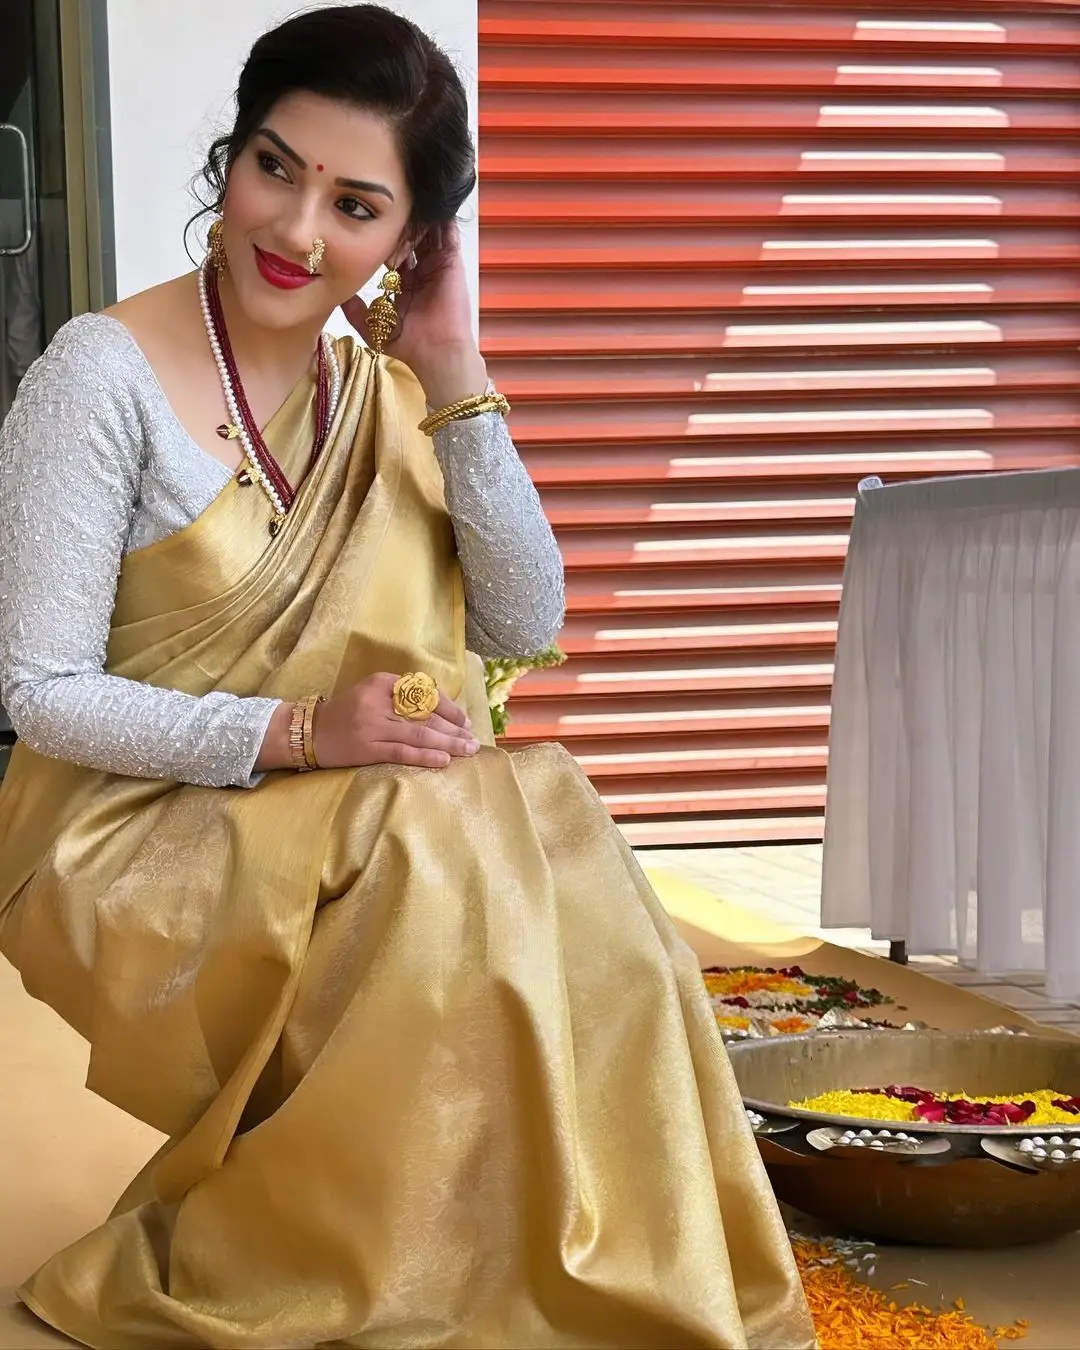 MEHREEN PIRZADA IMAGES IN TRADITIONAL YELLOW SAREE WHITE BLOUSE 2